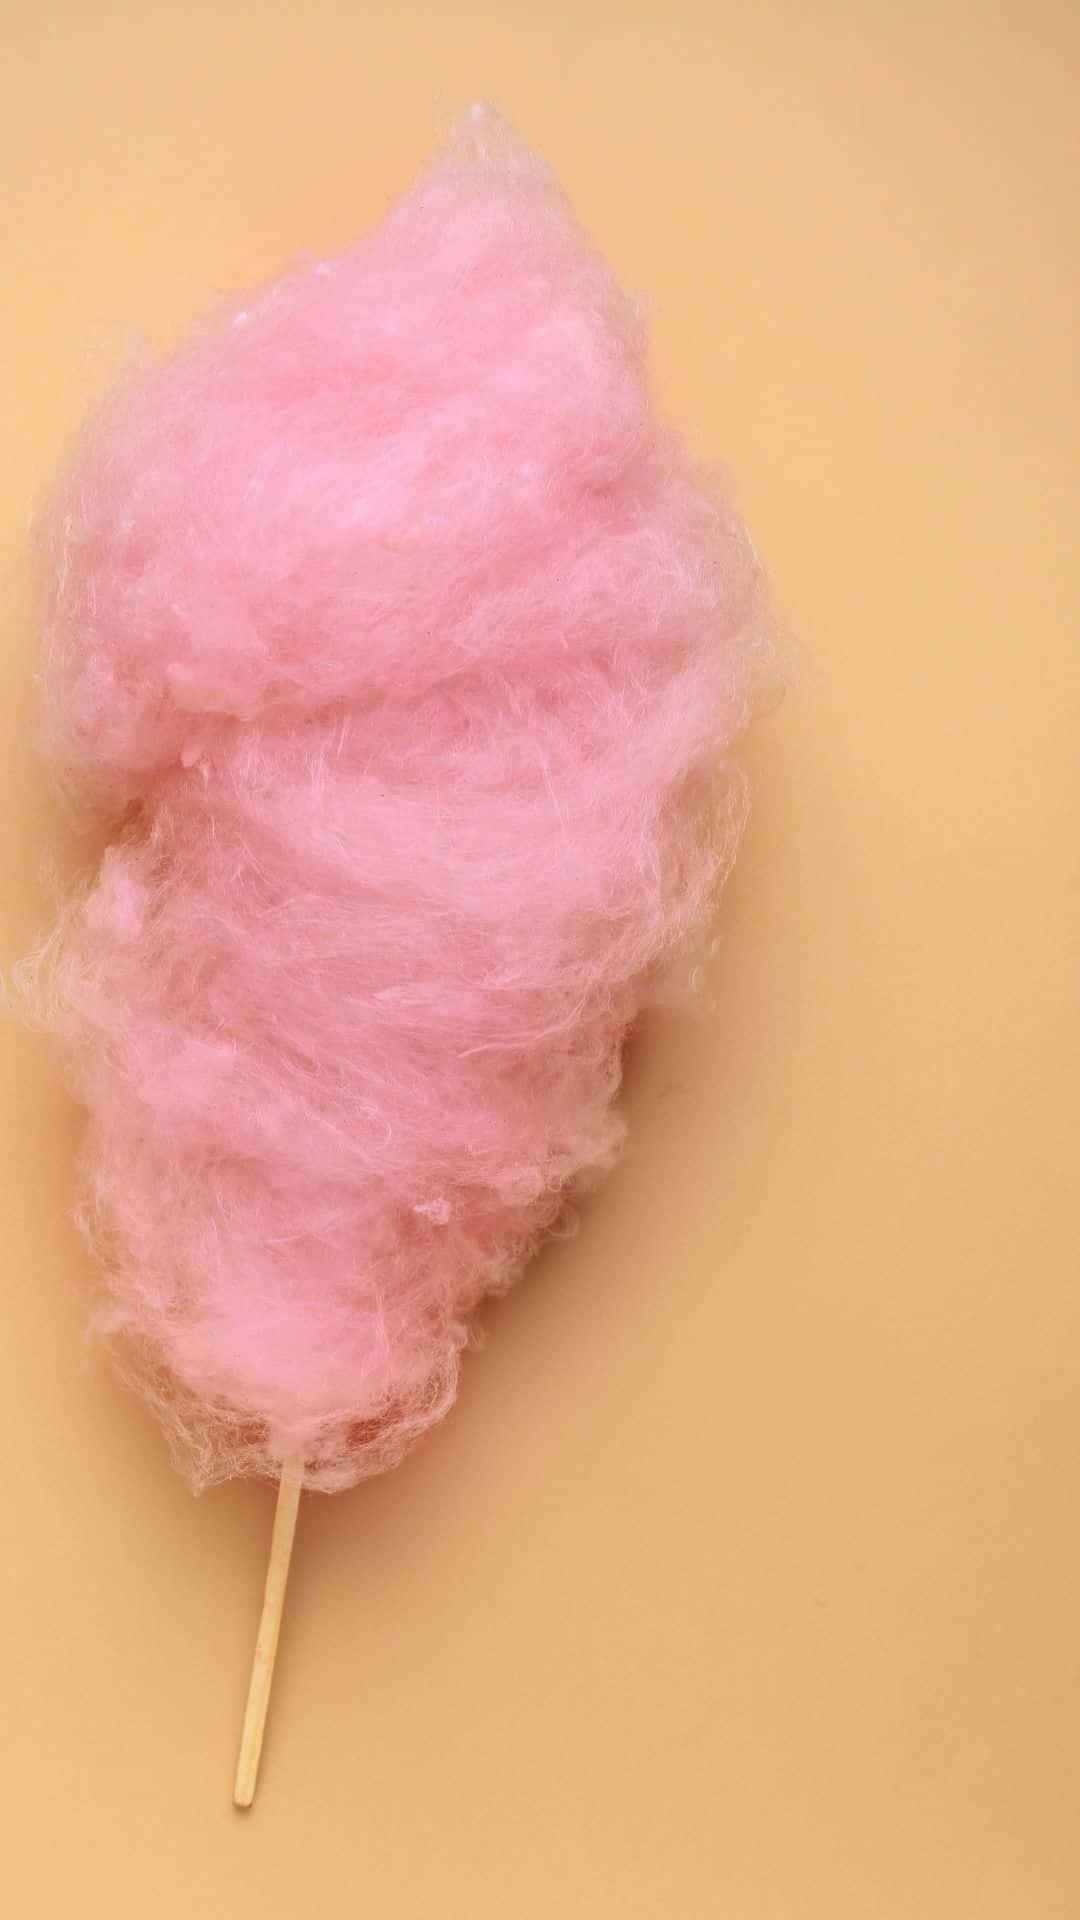 Delicious Fluffy Cotton Candy Wallpaper